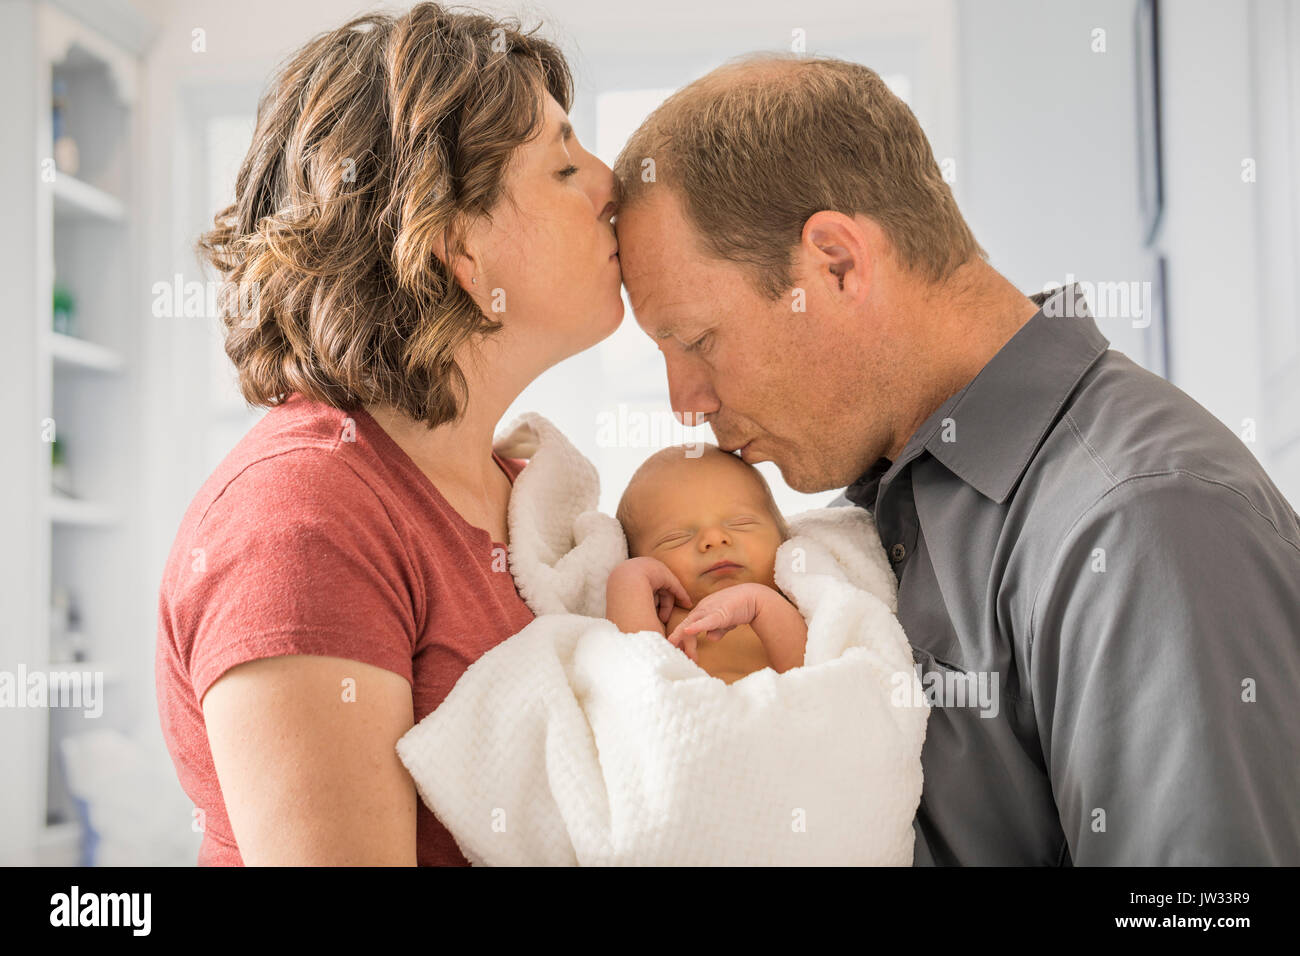 Parents holding and baby son (0-1 months) Stock Photo